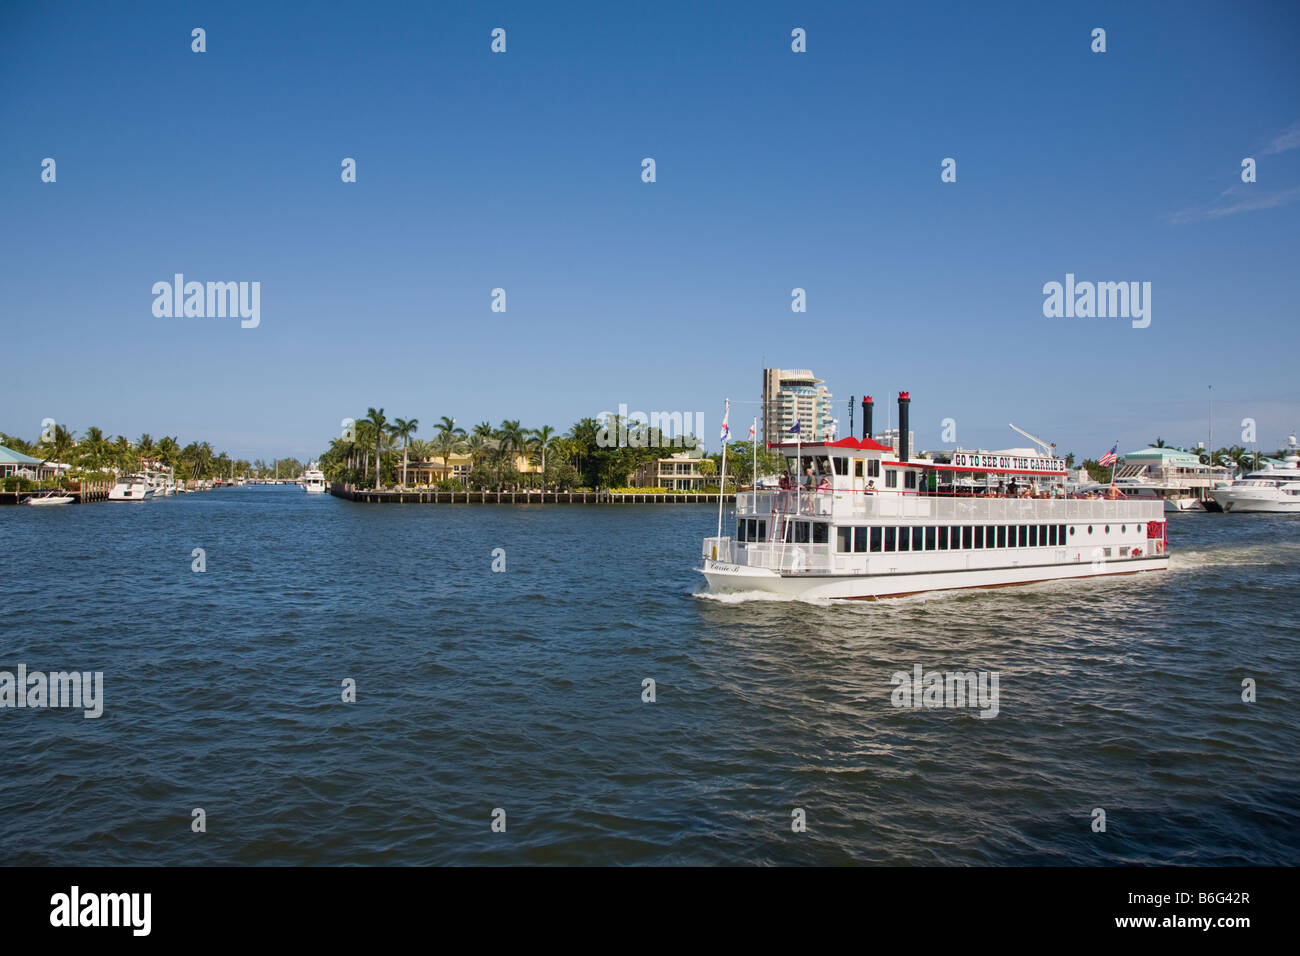 Sightseeing boat in the Atlantic Intracoastal Waterway in Fort Lauderdale Florida Stock Photo